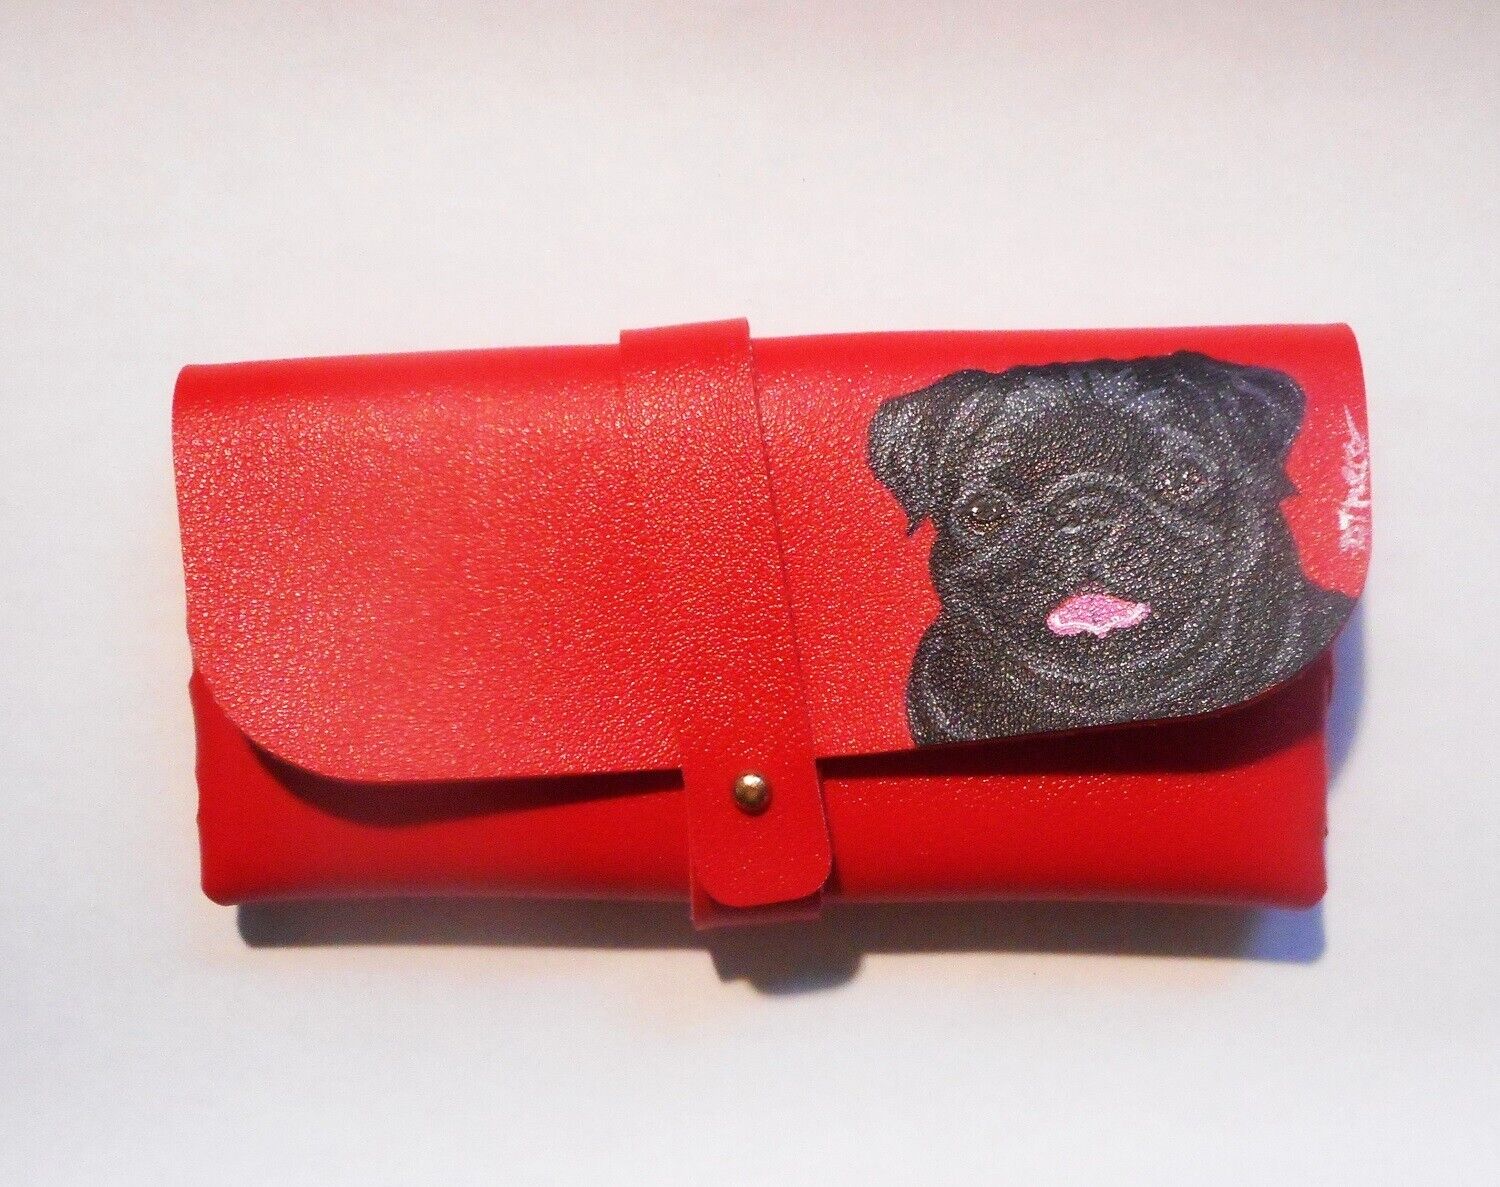 Pug Dog Portrait on Eyeglass Glasses Spectacles Case Hand Painted Без бренда